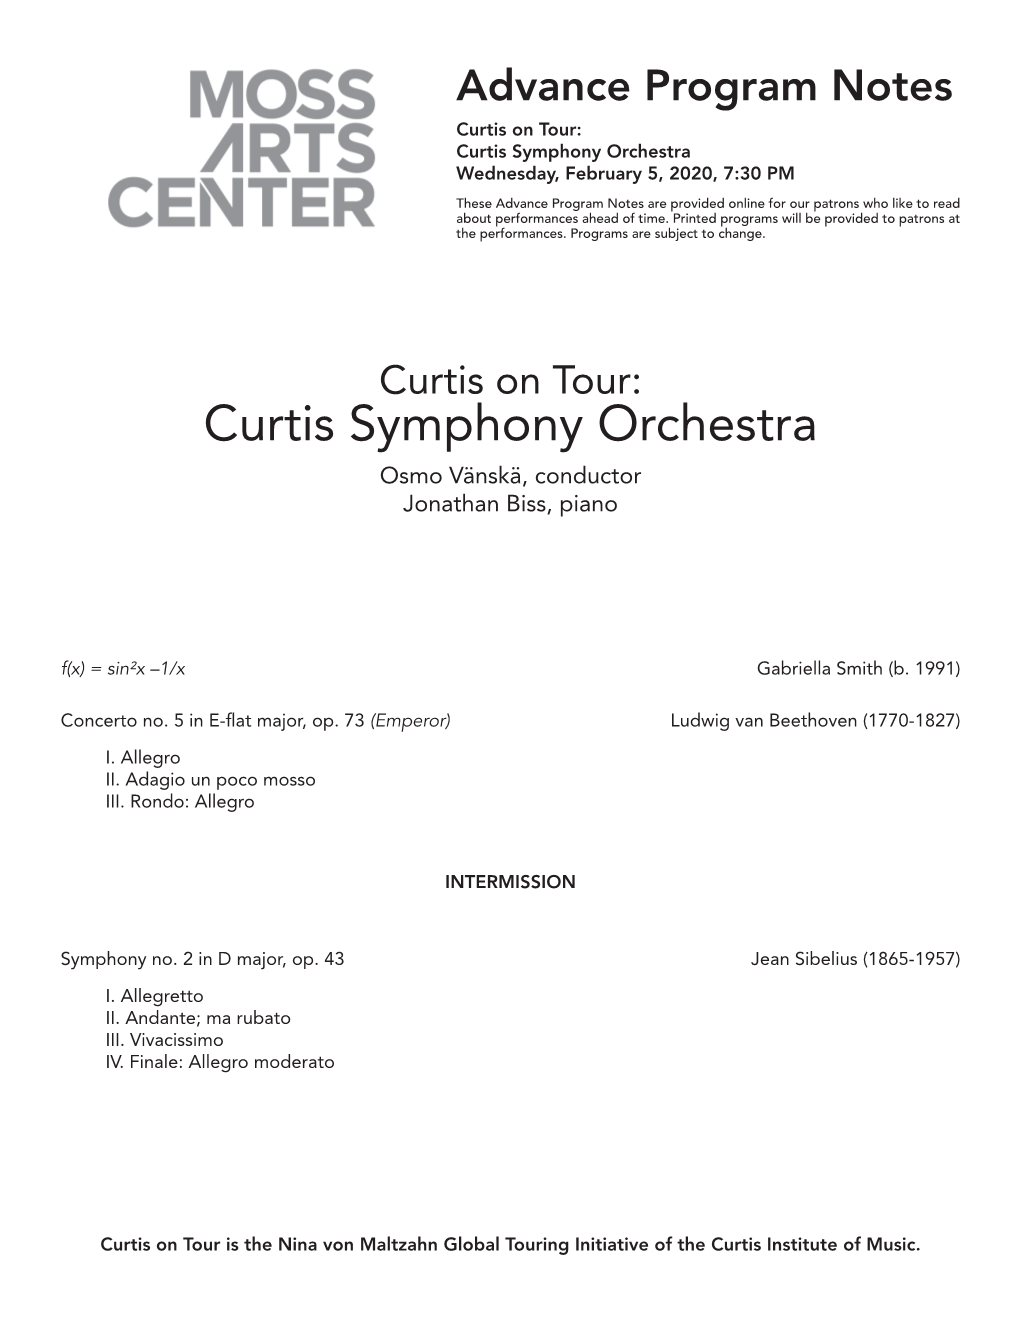 Curtis Symphony Orchestra Wednesday, February 5, 2020, 7:30 PM